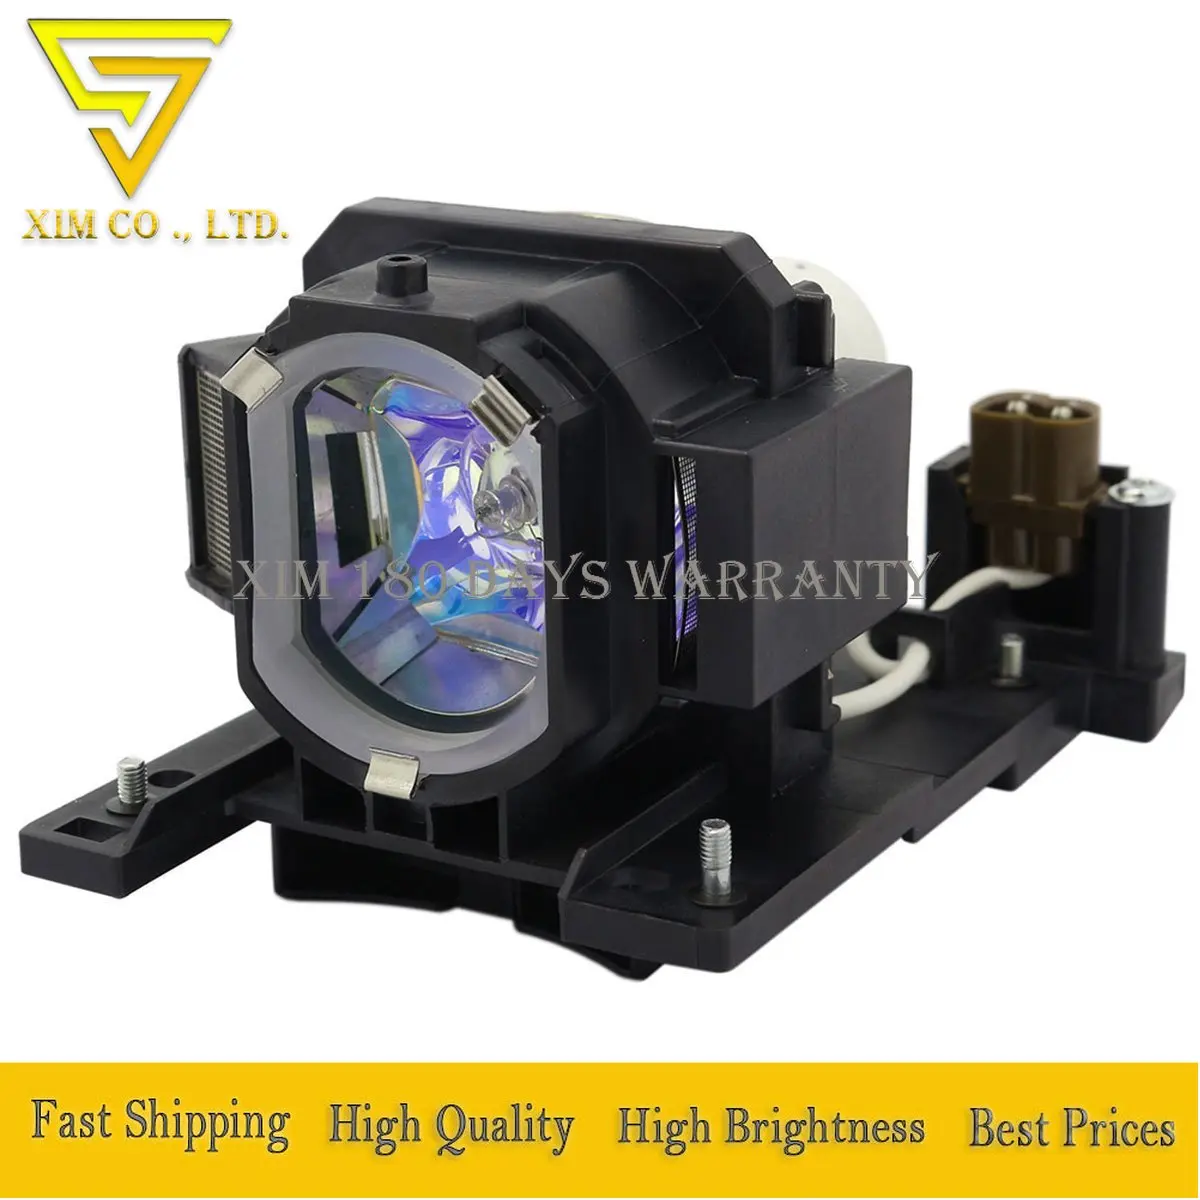 high quality DT01022 DT01026 Replacement Lamp with Housing for Hitachi CP-RX80W CP-RX78 ED-X24 CP-RX78W CP-RX80 projectors high brightnes projector bulb lamp cp rx78 rx78w cp rx80 cp rx80w ed x24 lamp projector